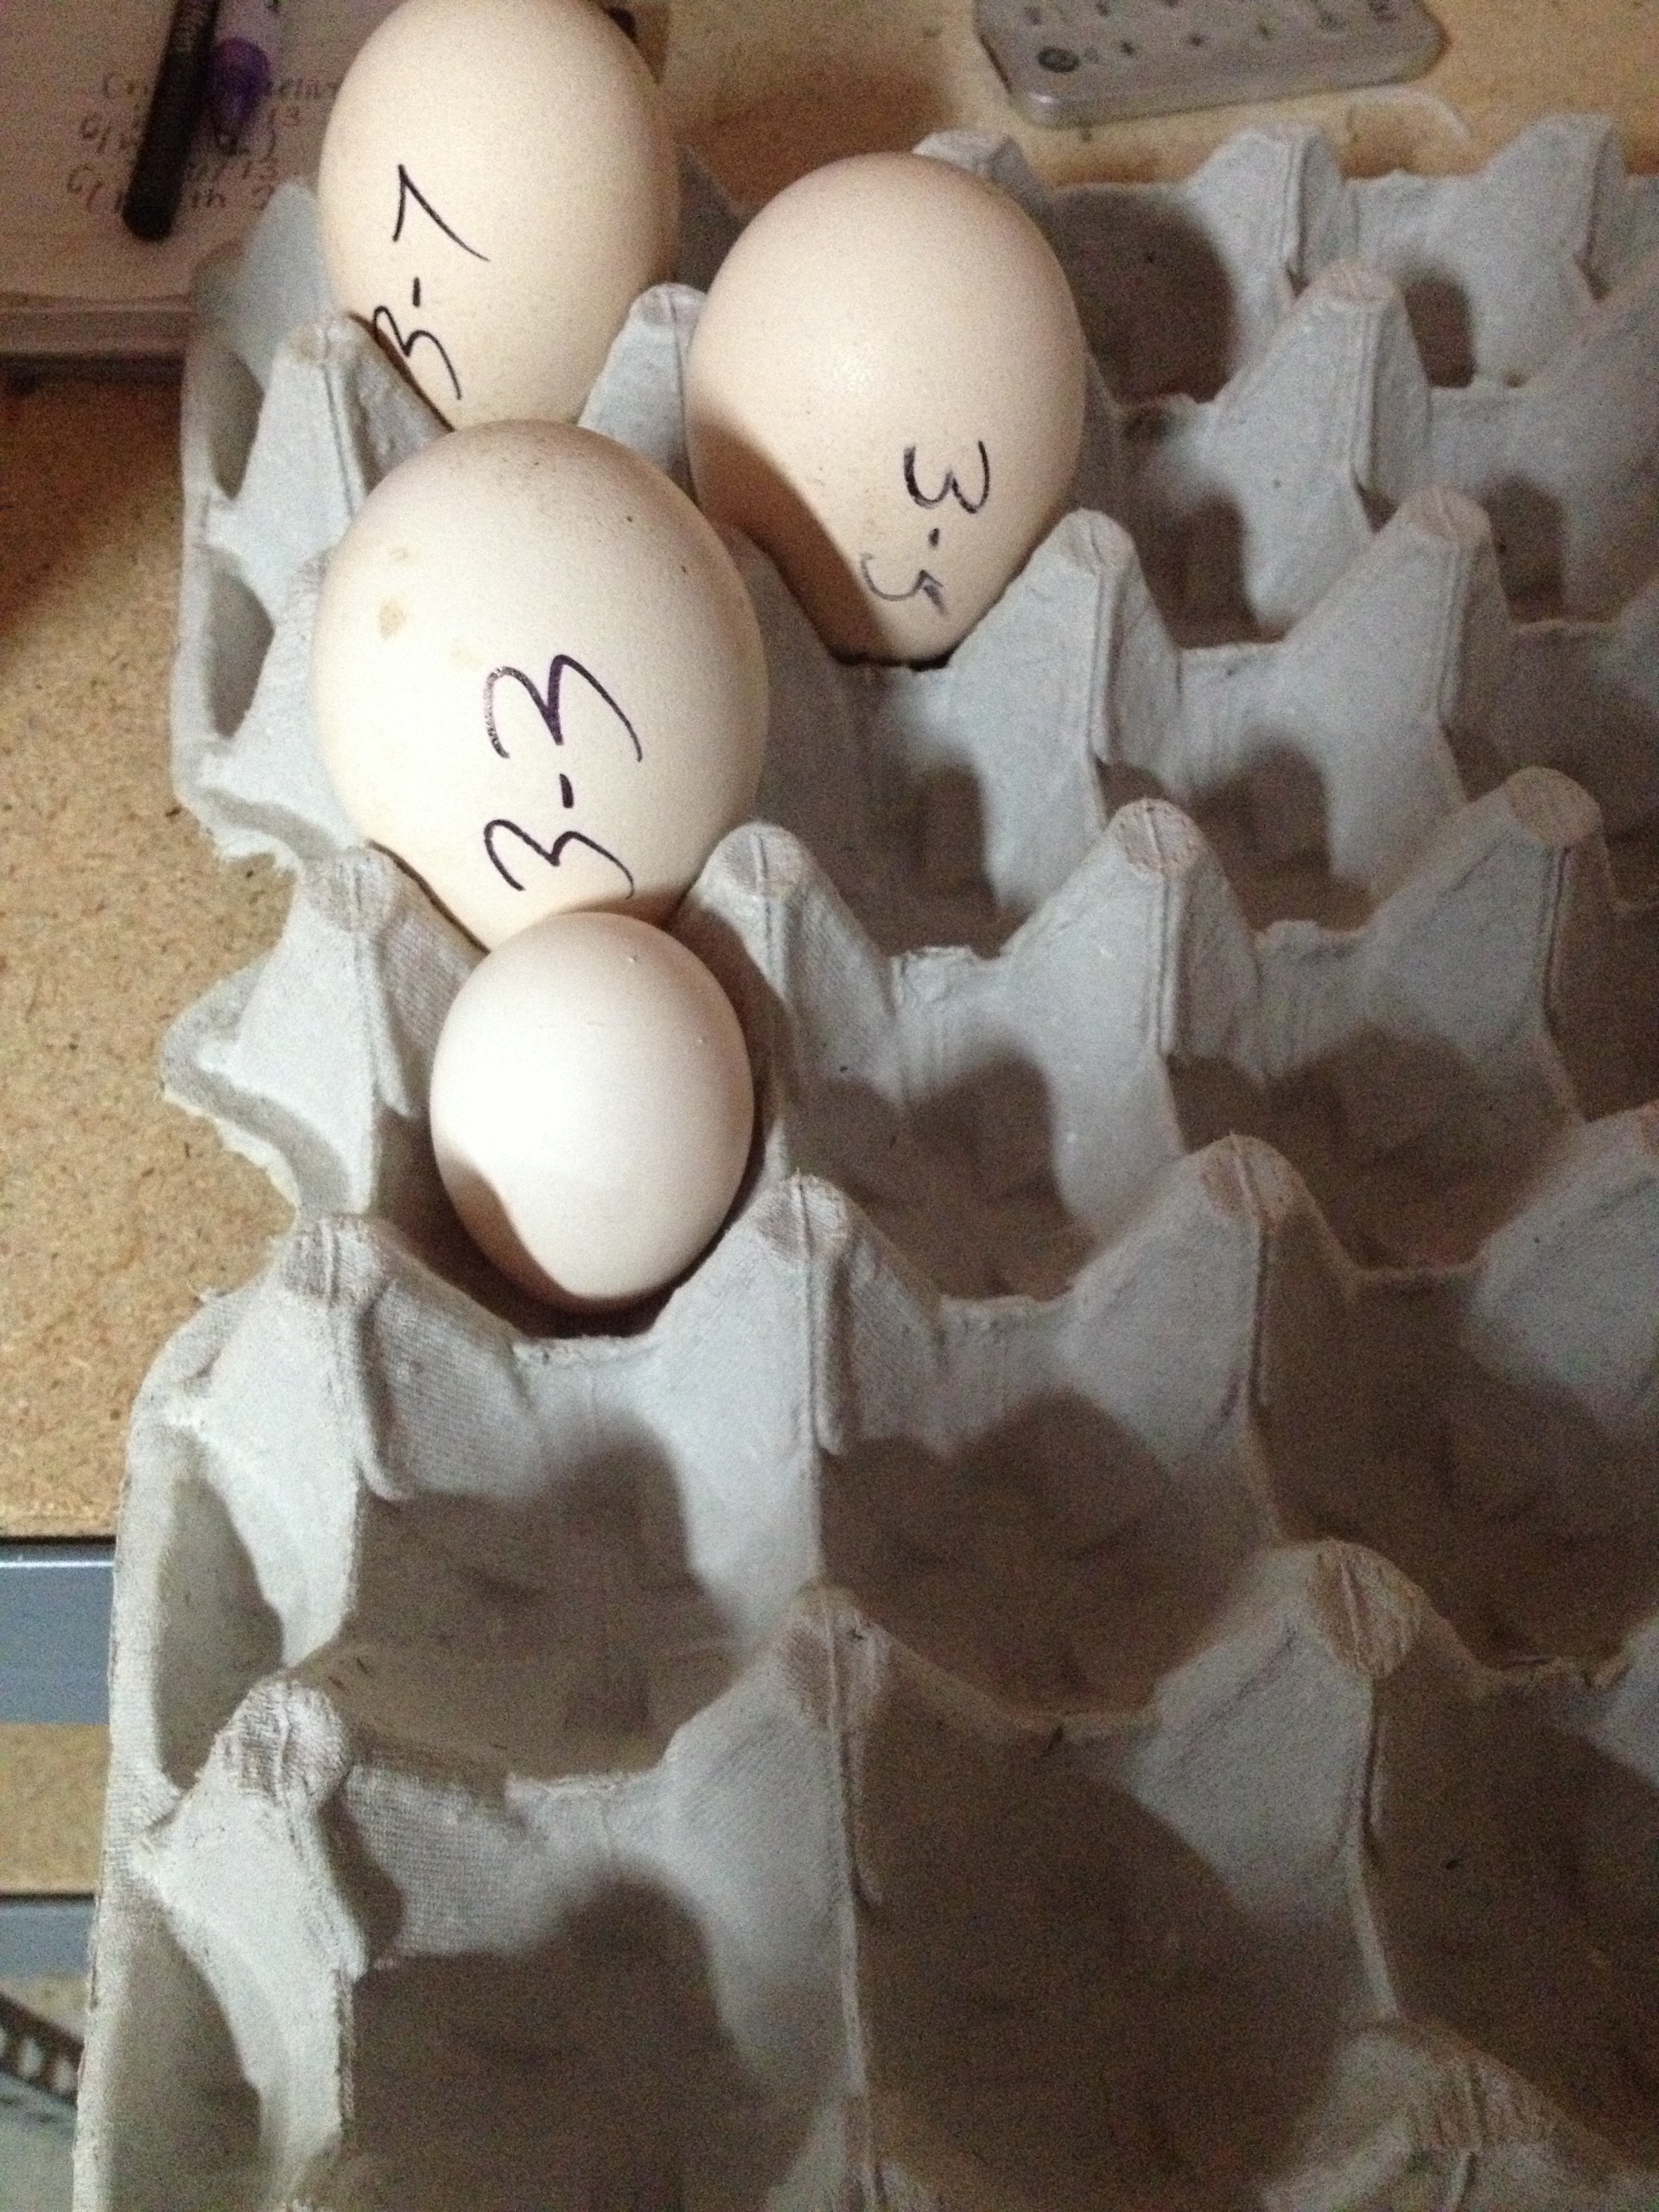 Three Pea eggs and One White Silkie egg. 3/8/13 8:38pm